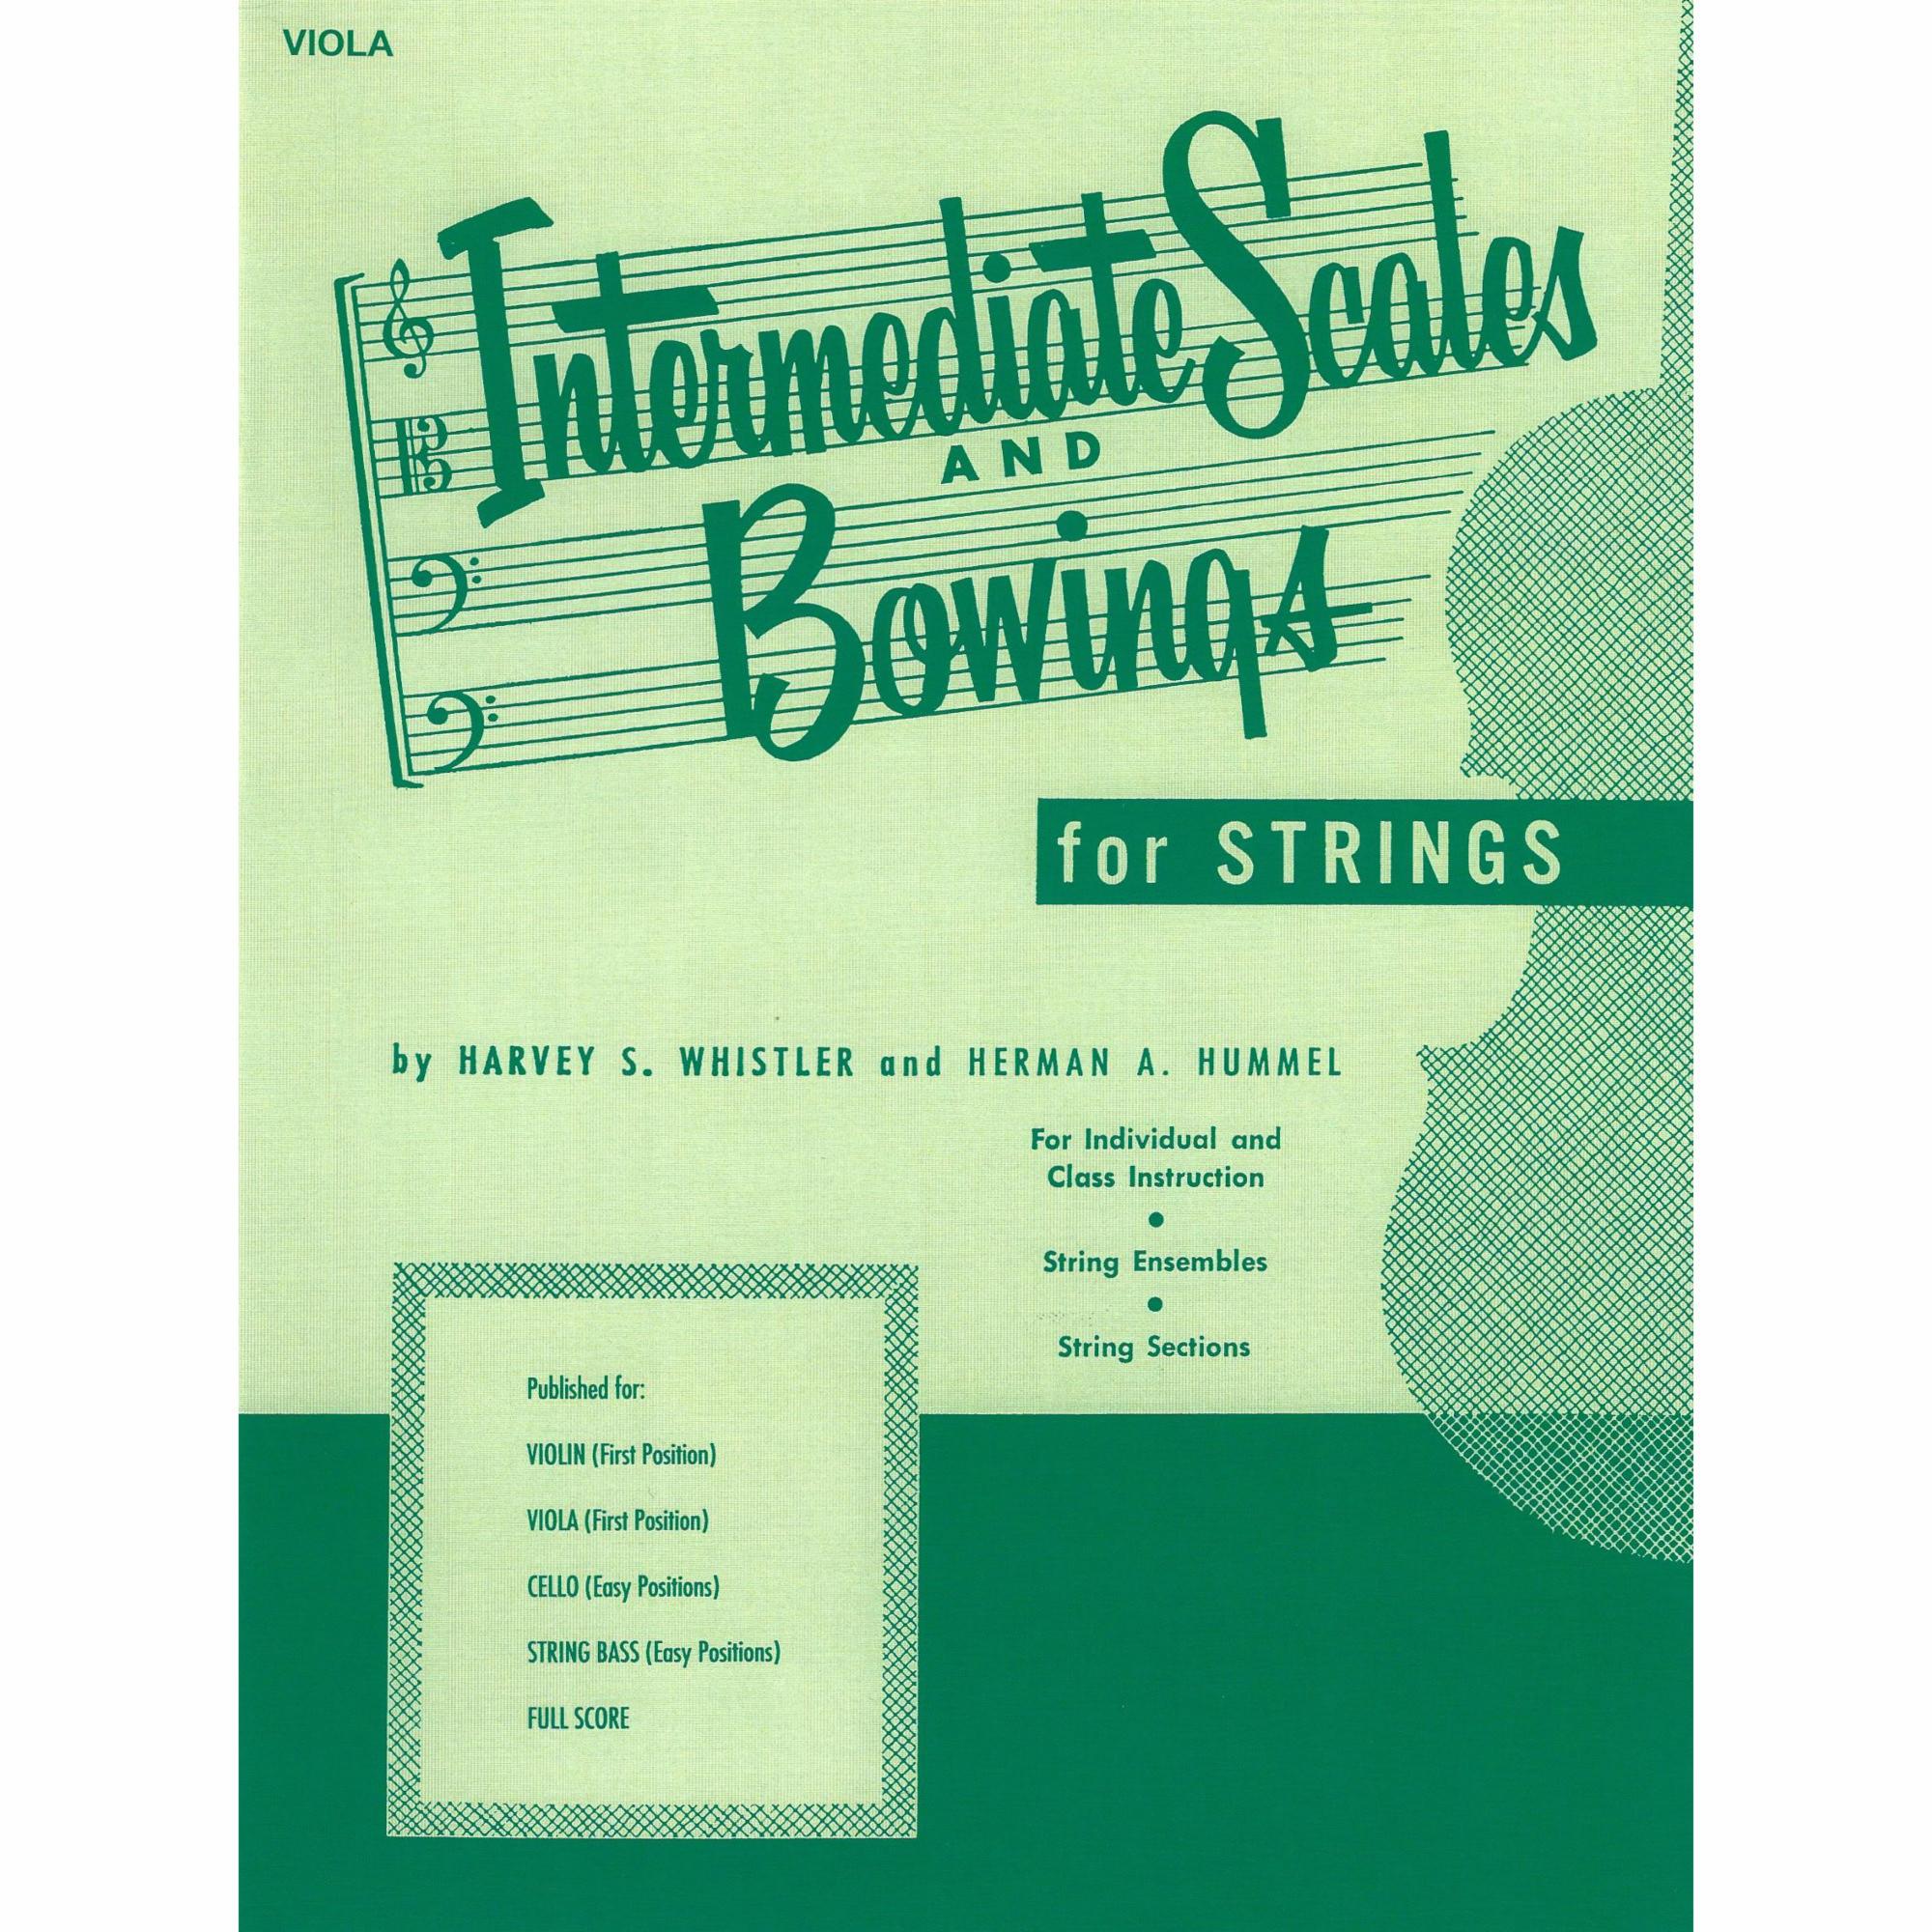 Intermediate Scales and Bowings for Viola